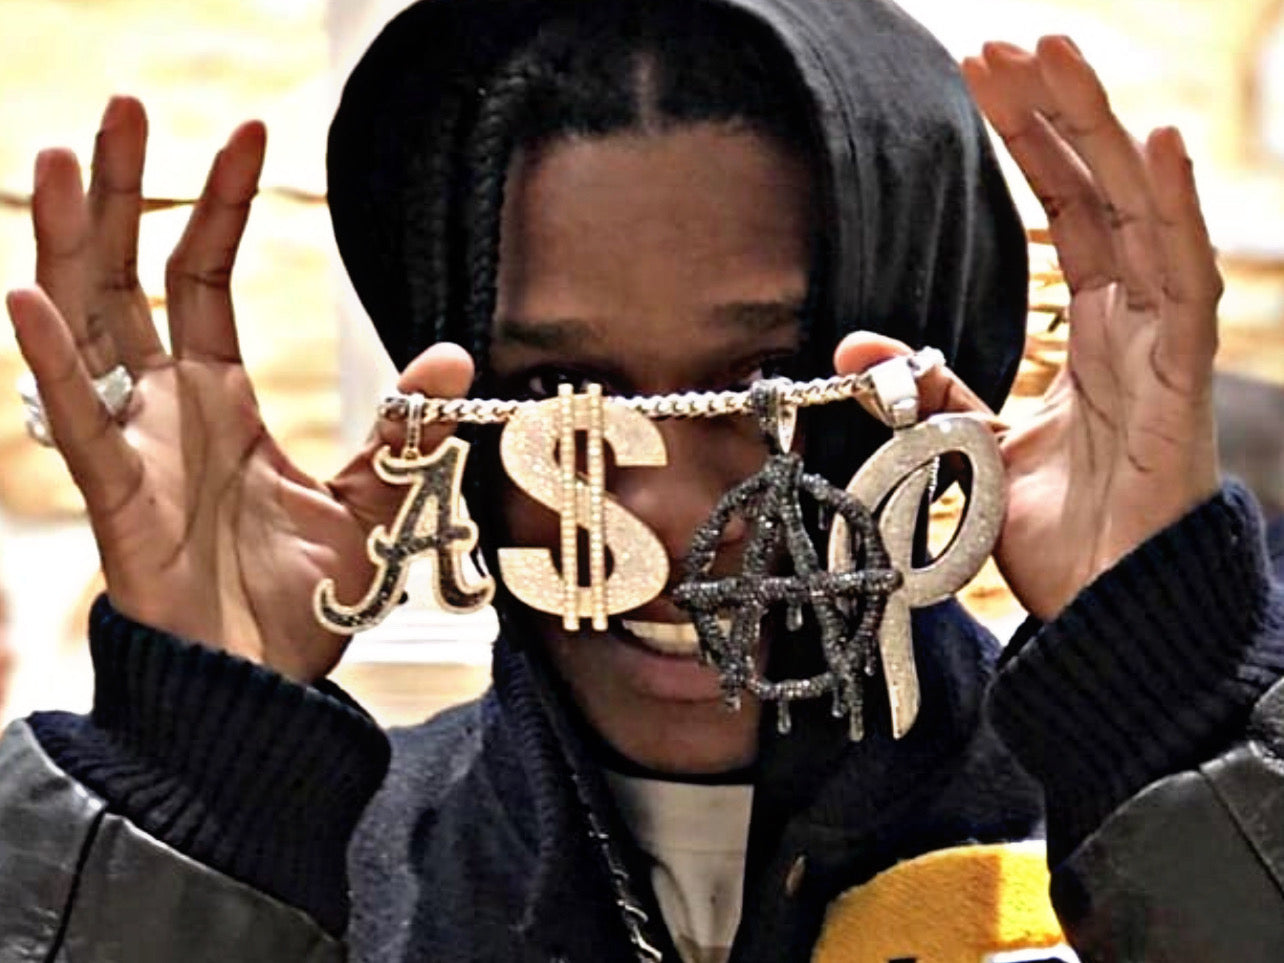 Biggie, A$AP Rocky, and Other Artists' Jewelry to Be Showcased in Natural History Museum Exhibit